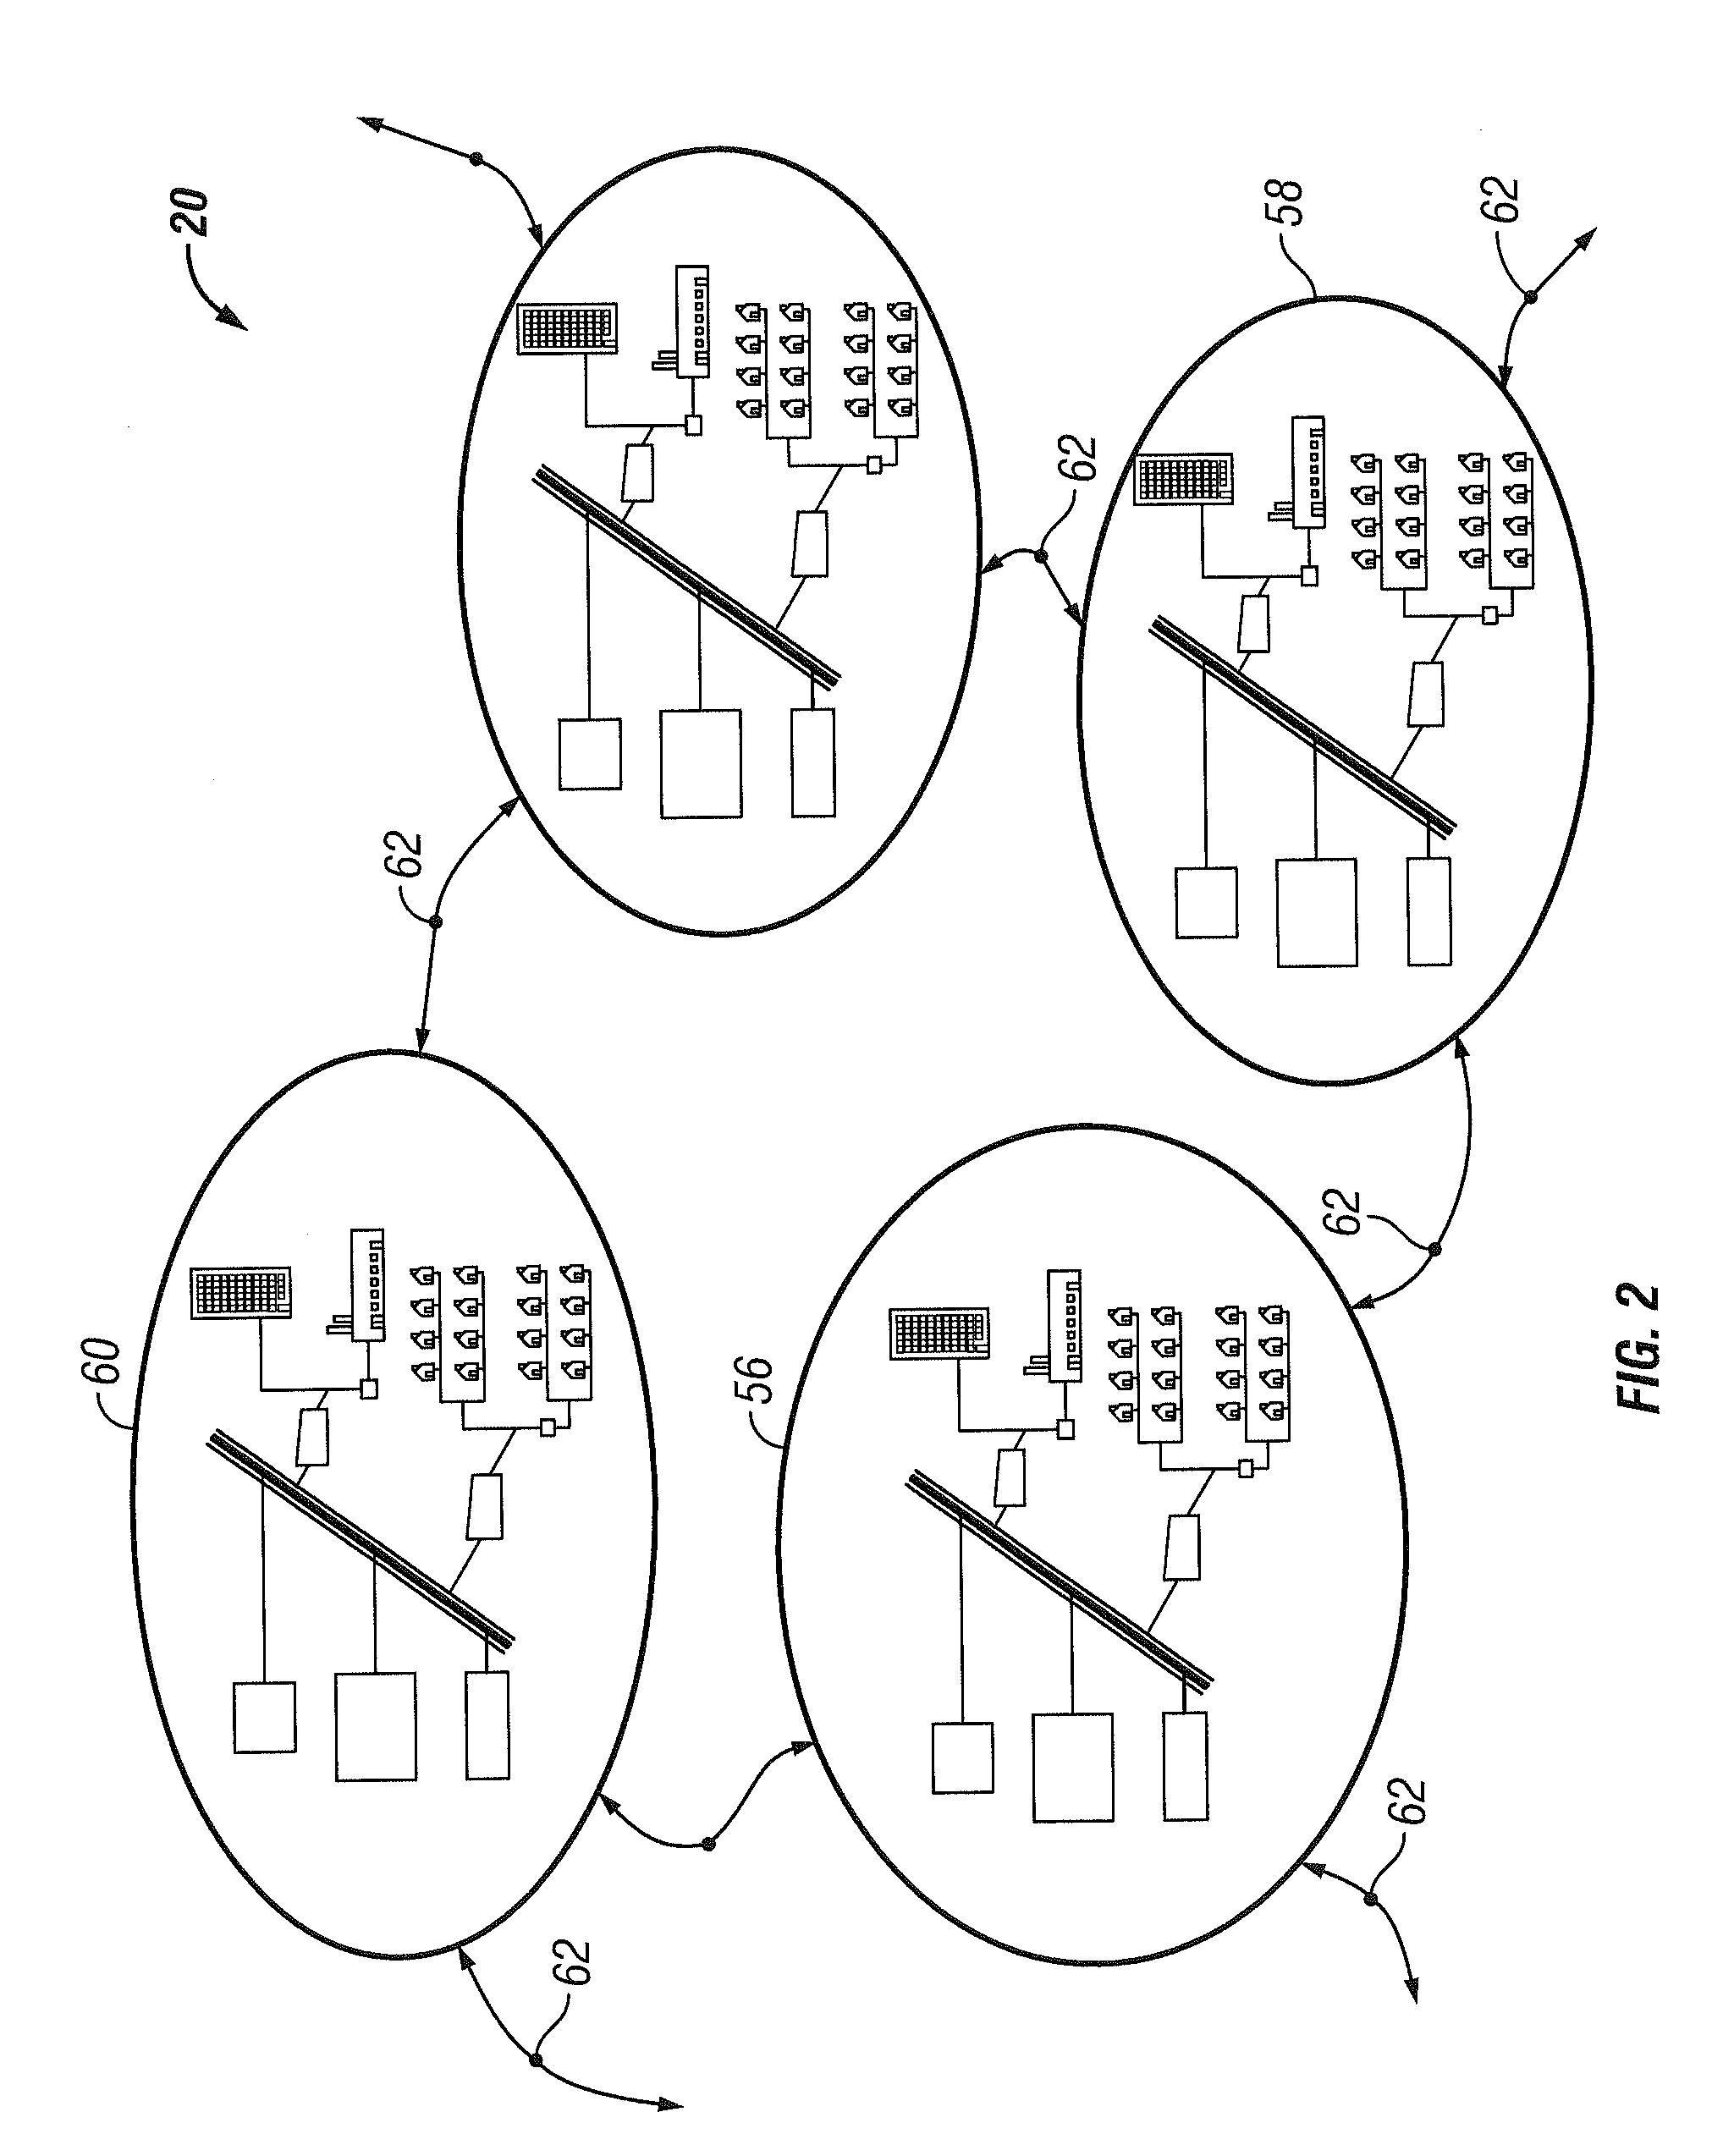 Electrical network command and control system and method of operation